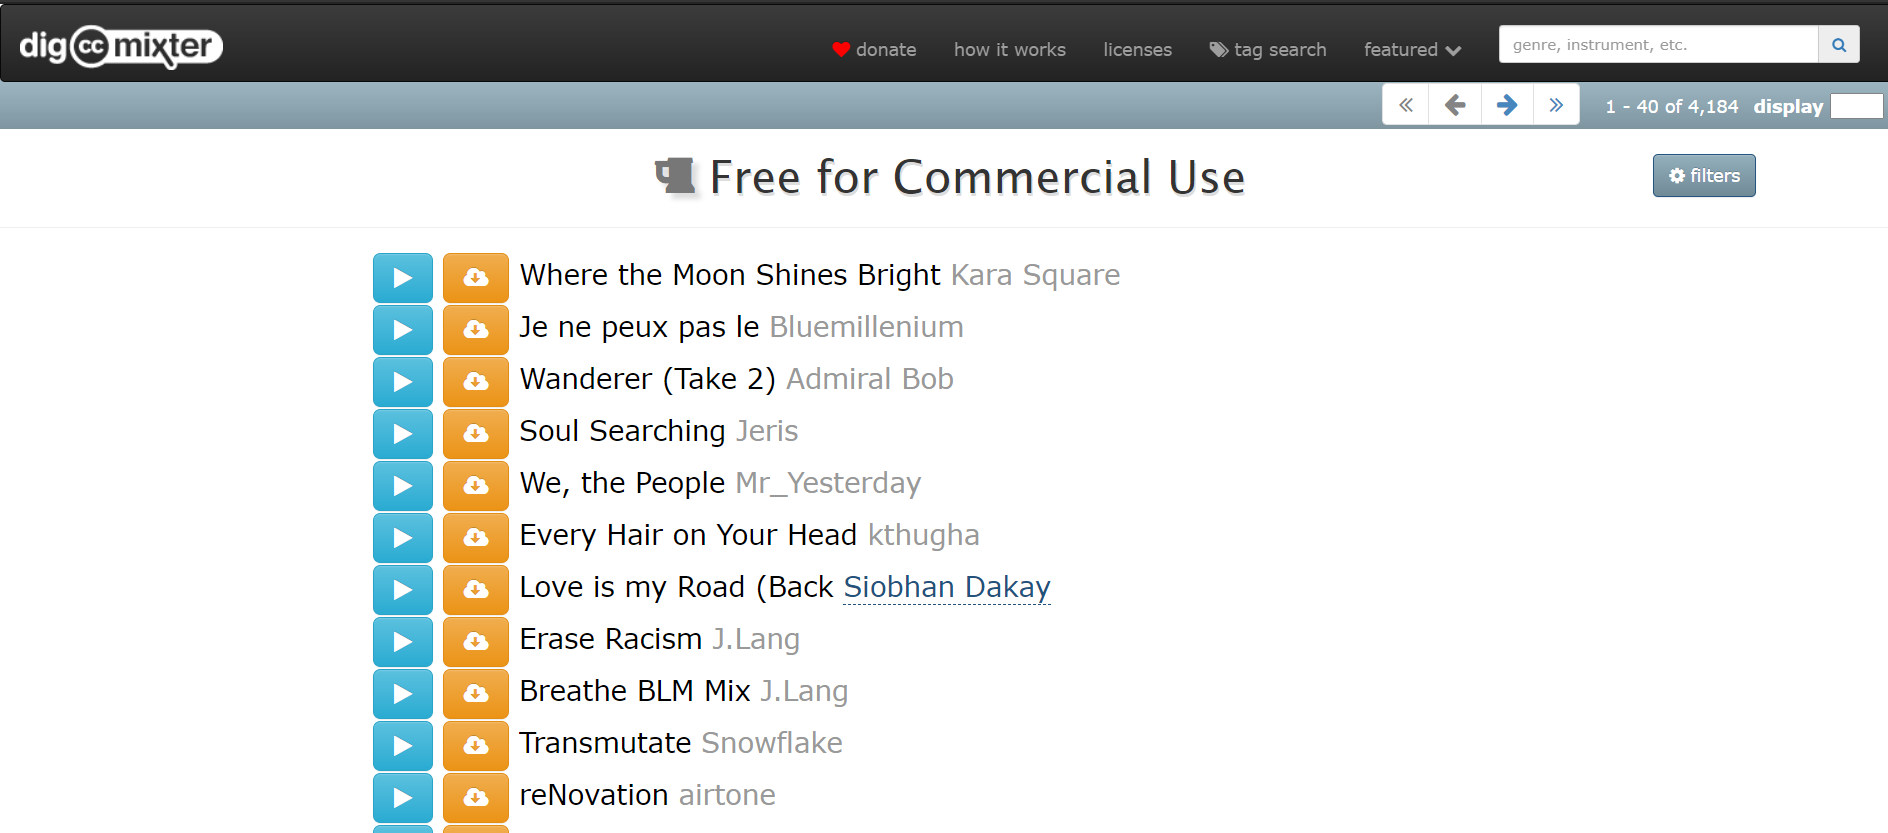 Dig CC Mixter is great place to find good background music for videos. The interface has a well catalogued music items. 